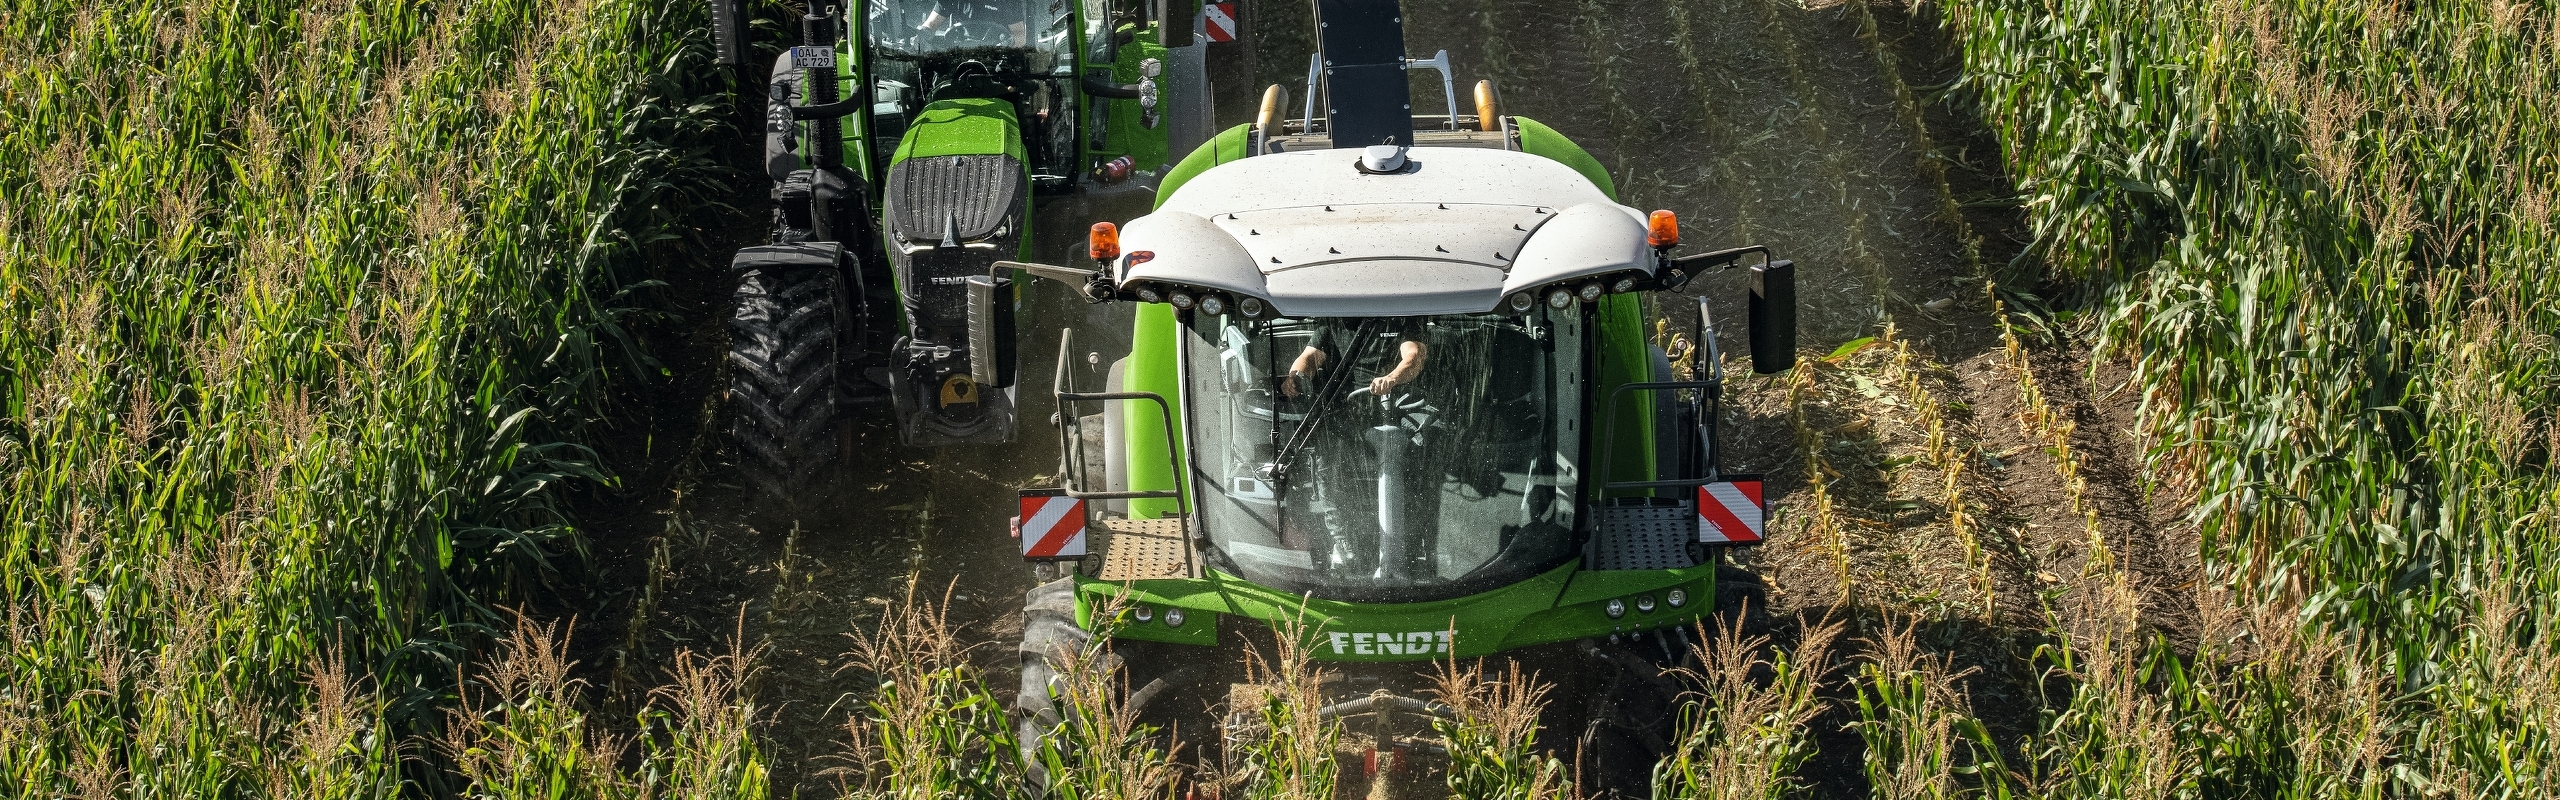 Bird's eye view of the Fendt Katana next to a Fendt tractor in a maize field